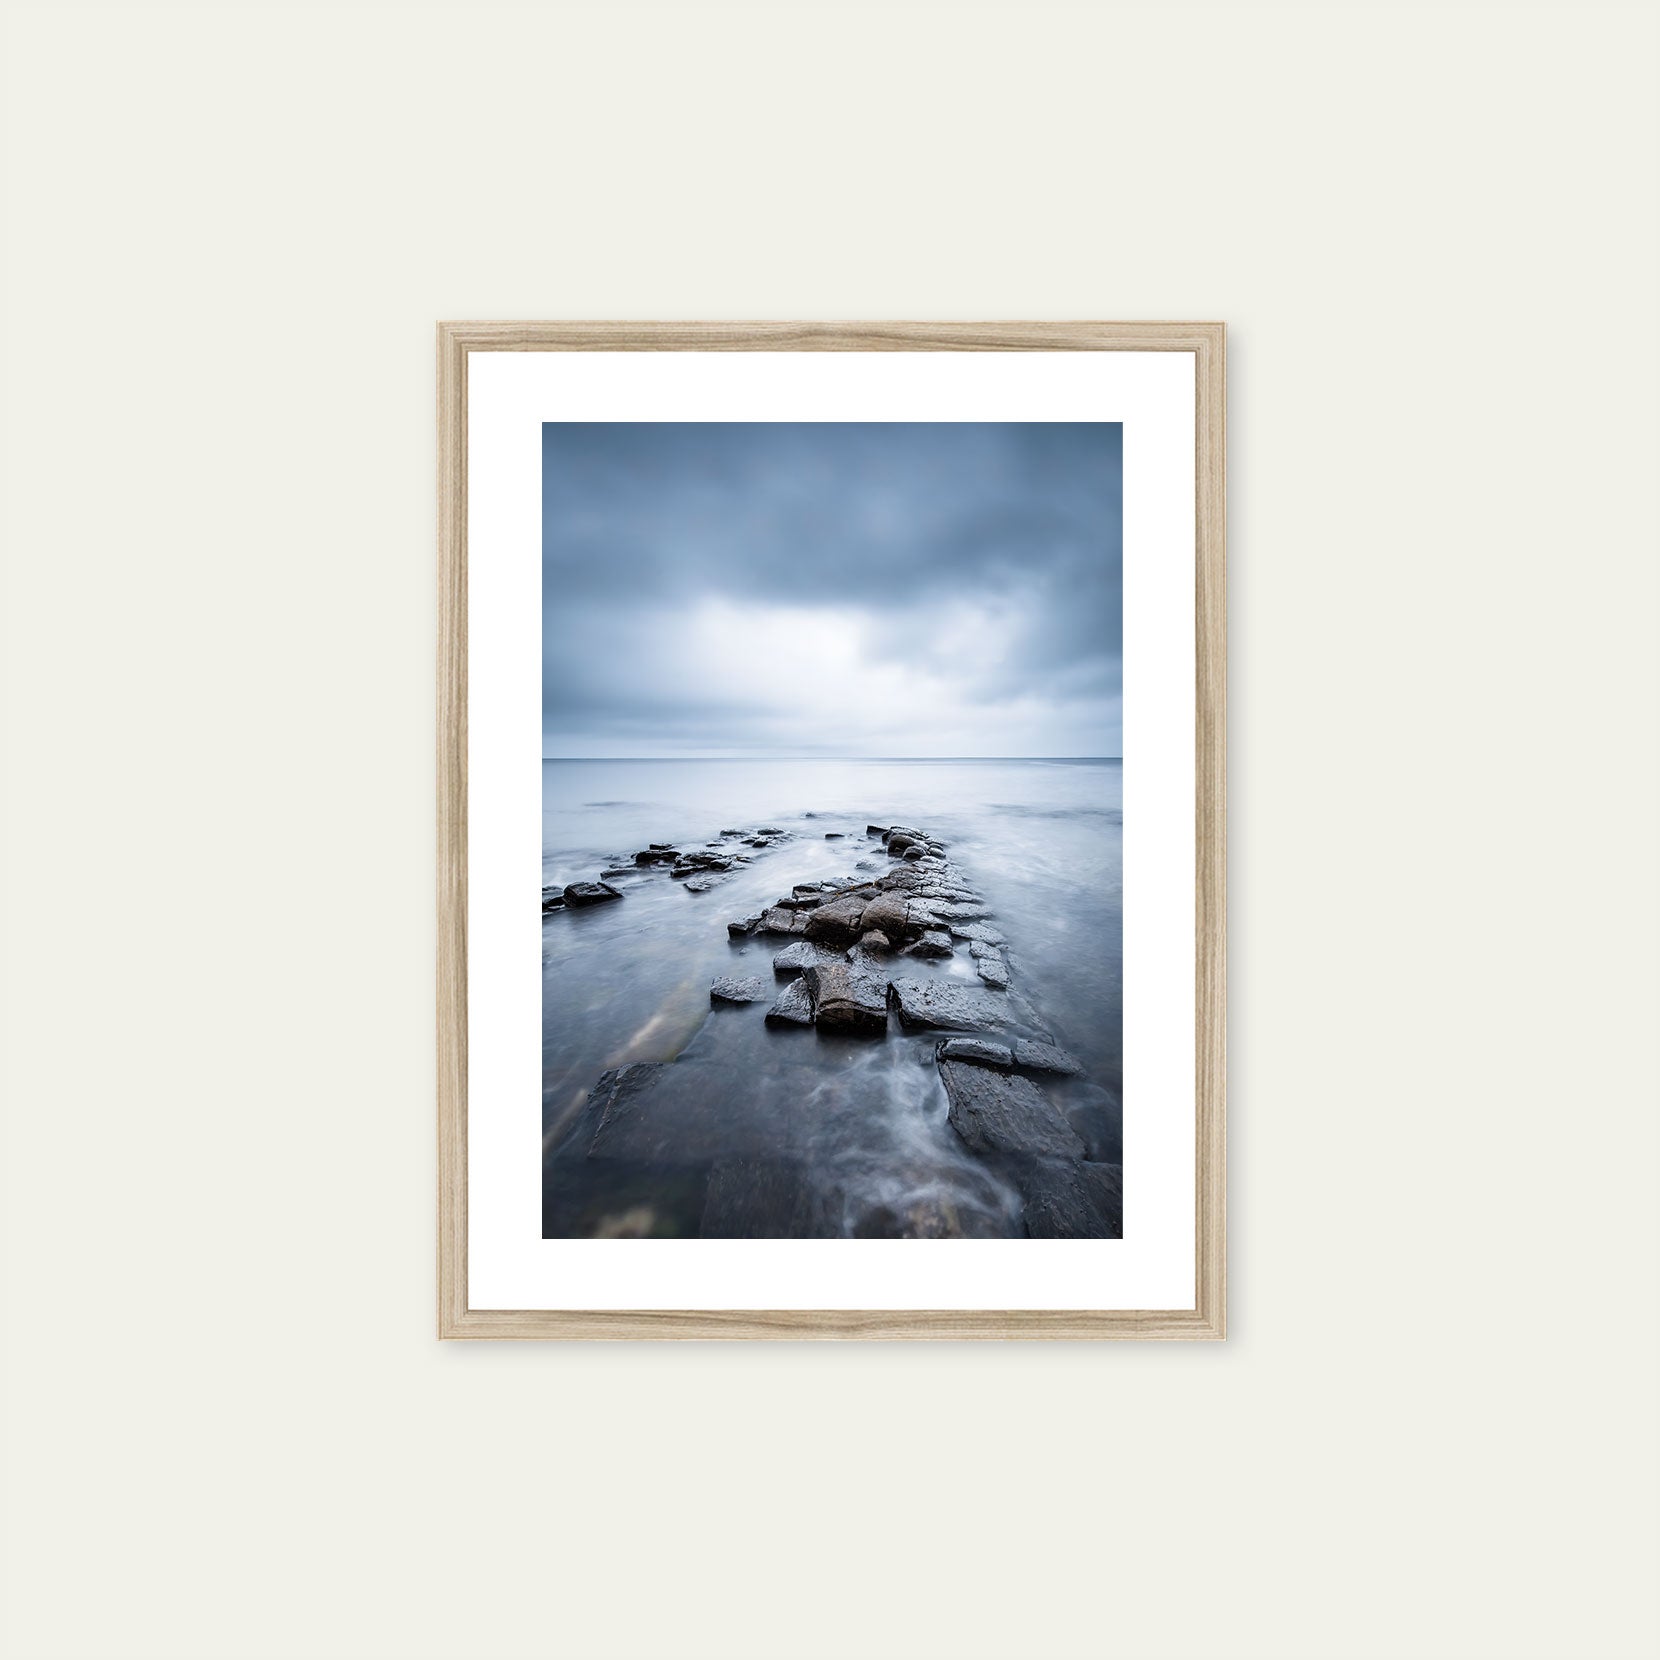 A wood framed print of a moody seascape in Norway